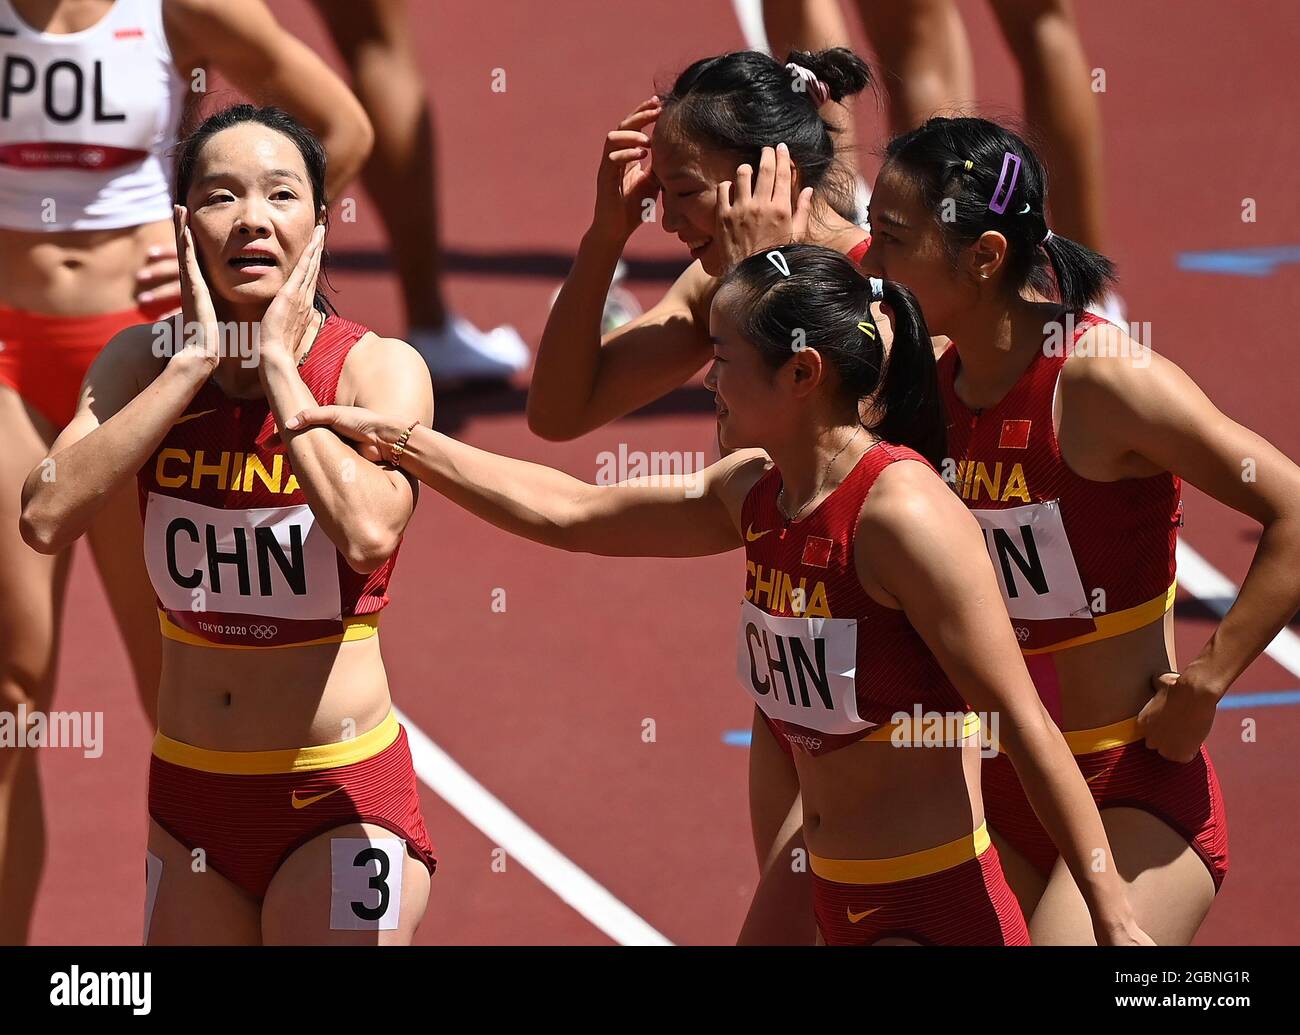 Tokyo, Japan. 5th Aug, 2021. Team China react after the women's 4x100m relay heats at Tokyo 2020 Olympic Games, in Tokyo, Japan, Aug. 5, 2021. Credit: Li Yibo/Xinhua/Alamy Live News Stock Photo